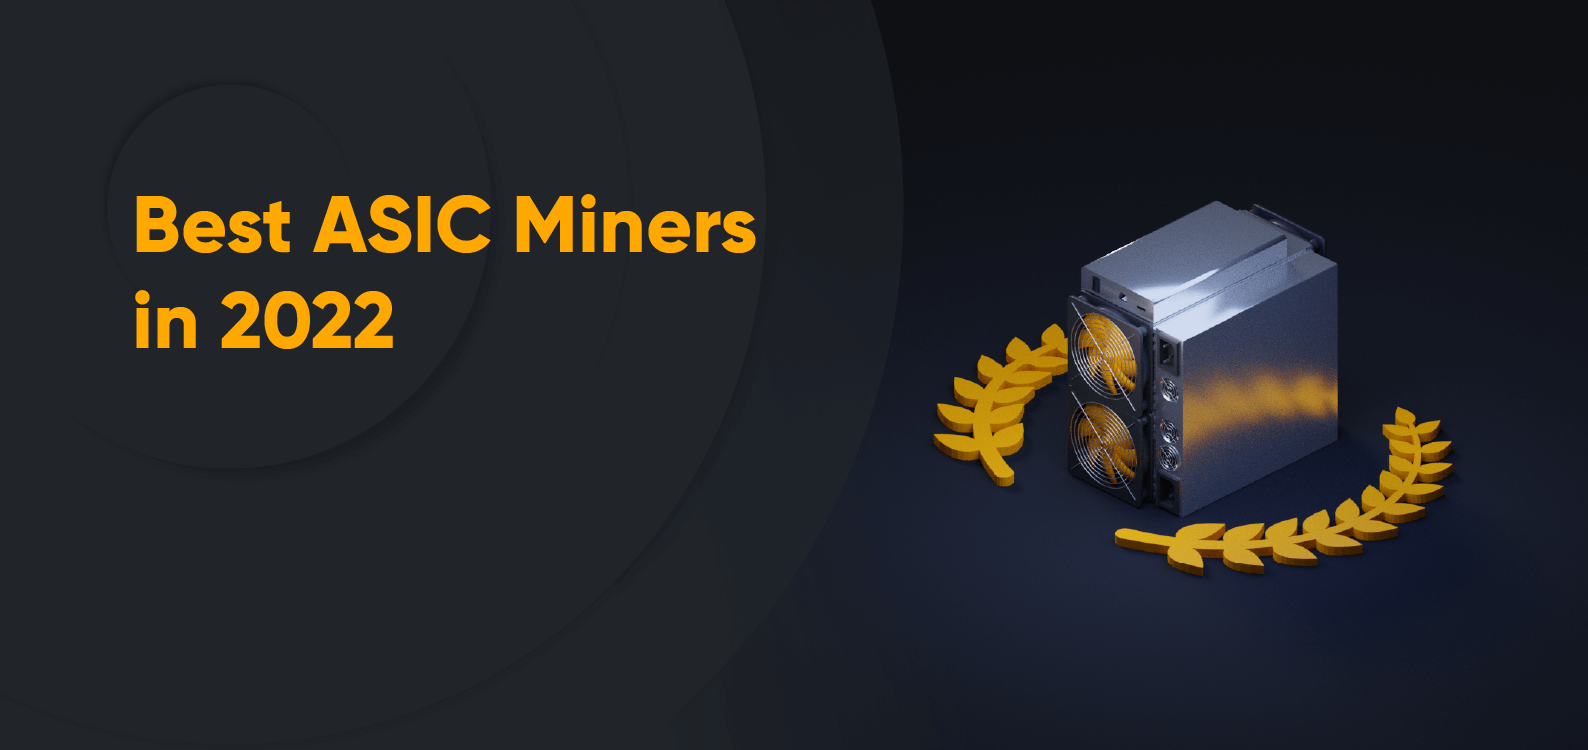 Raw Mastermind Snazzy 15 Best ASIC Miners For Mining Cryptocurrency In 2022